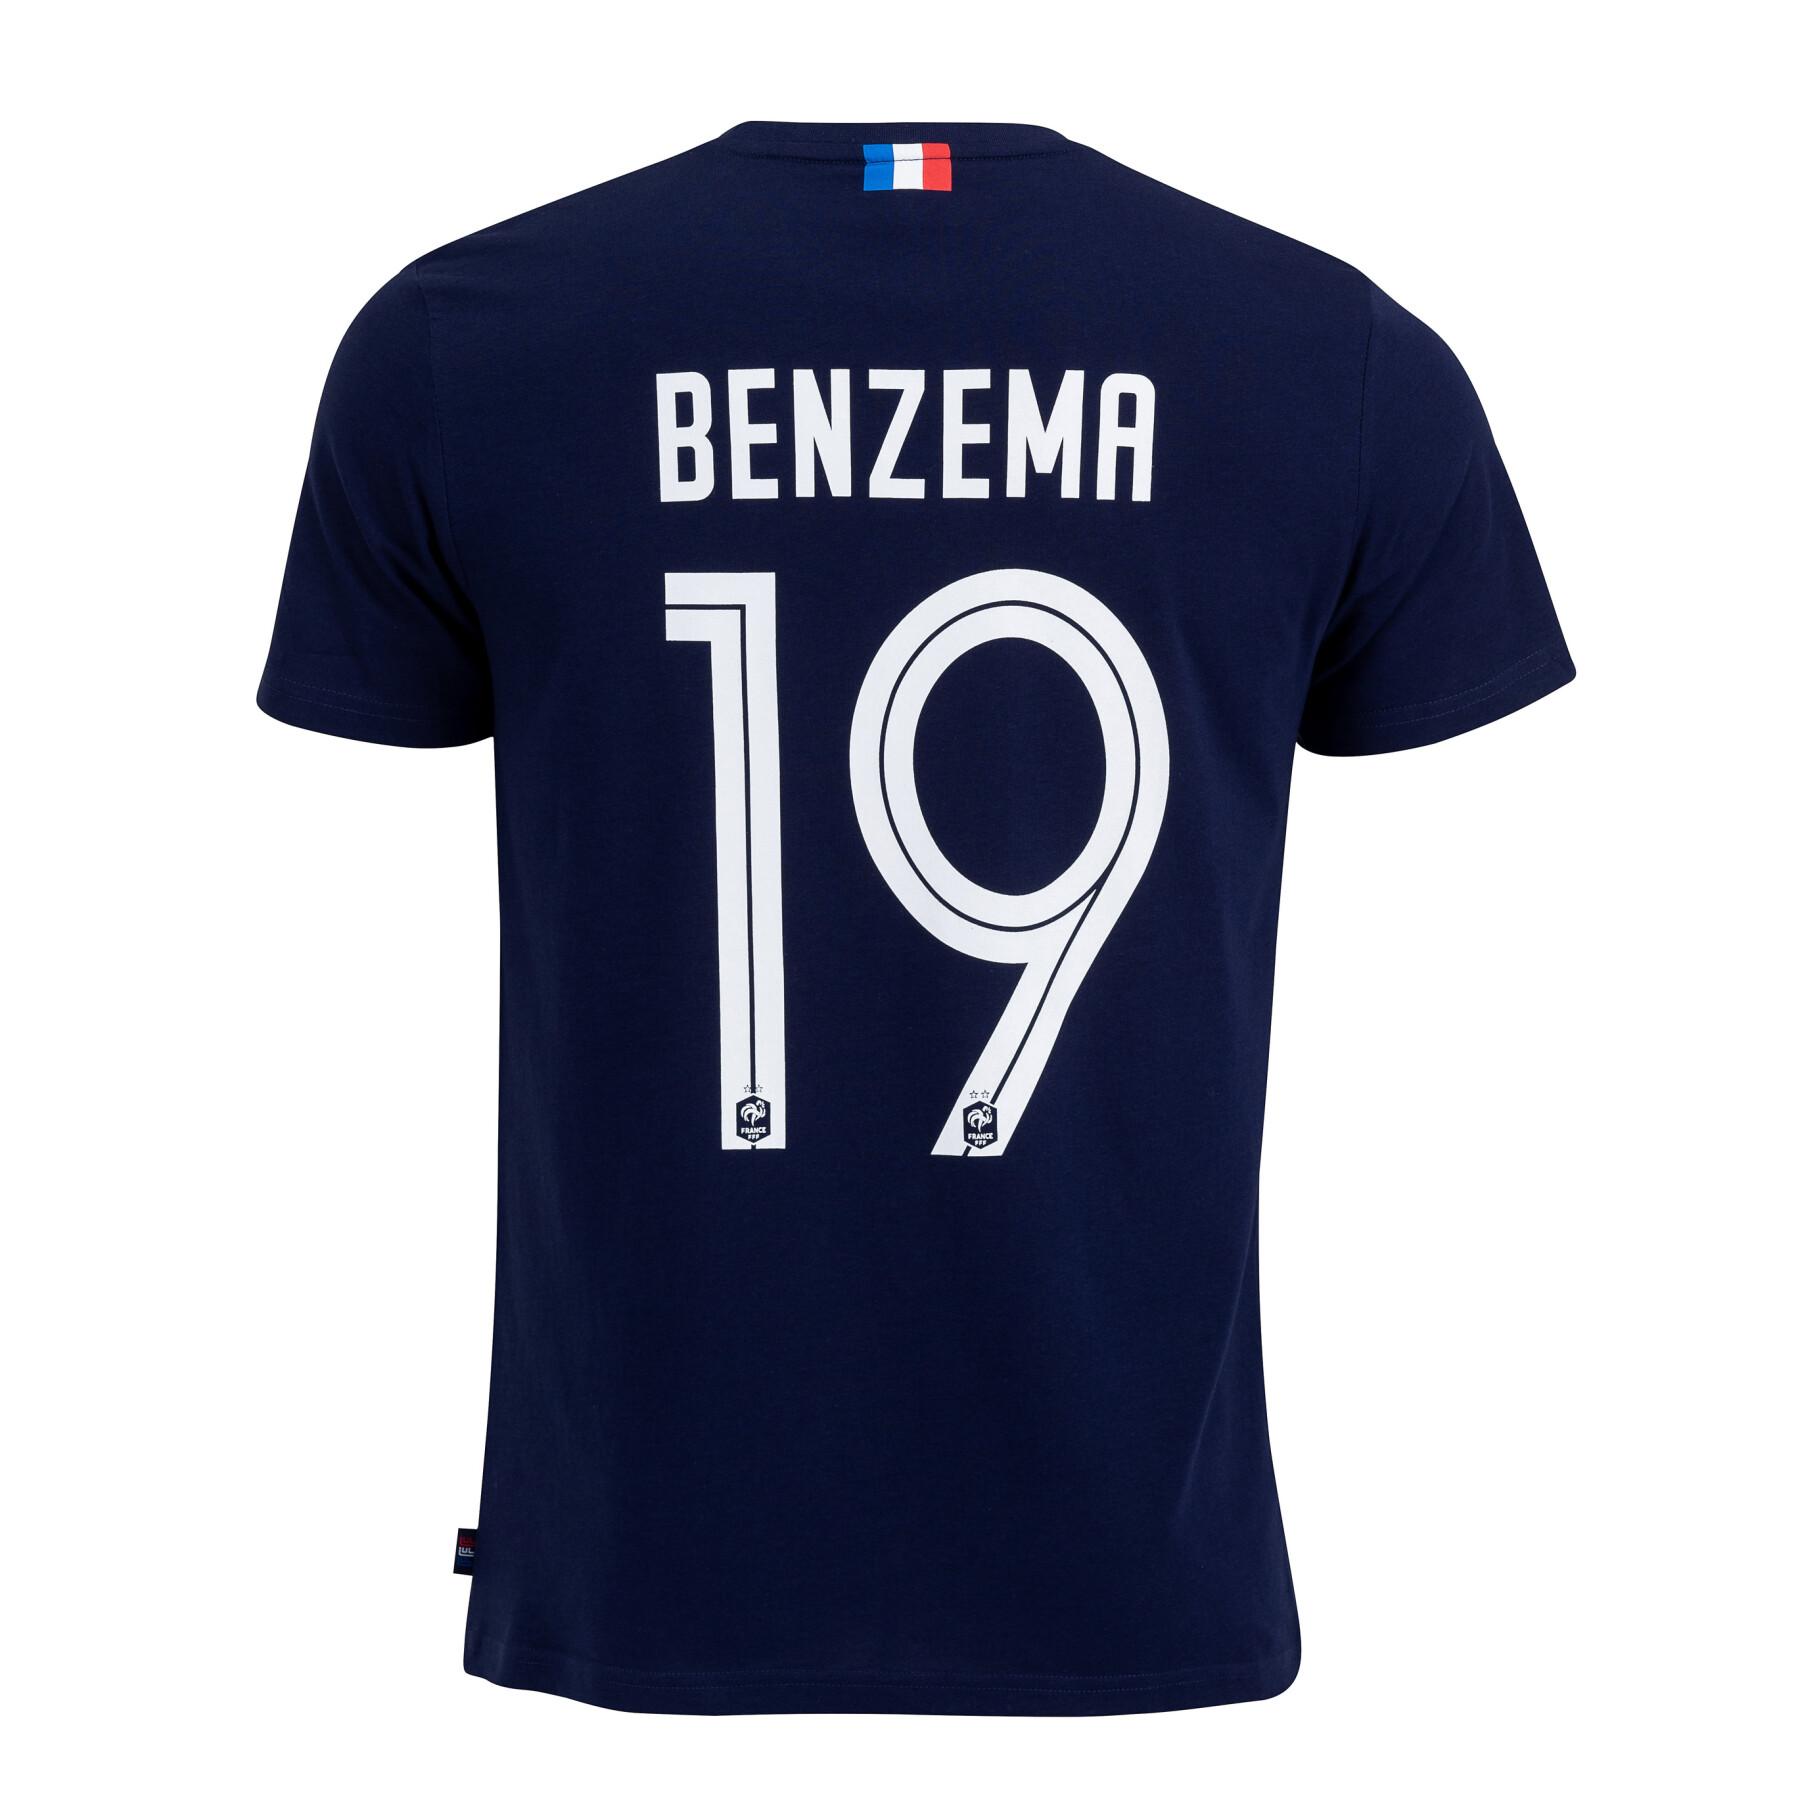 Team T-shirt from France Benzema 2022/23